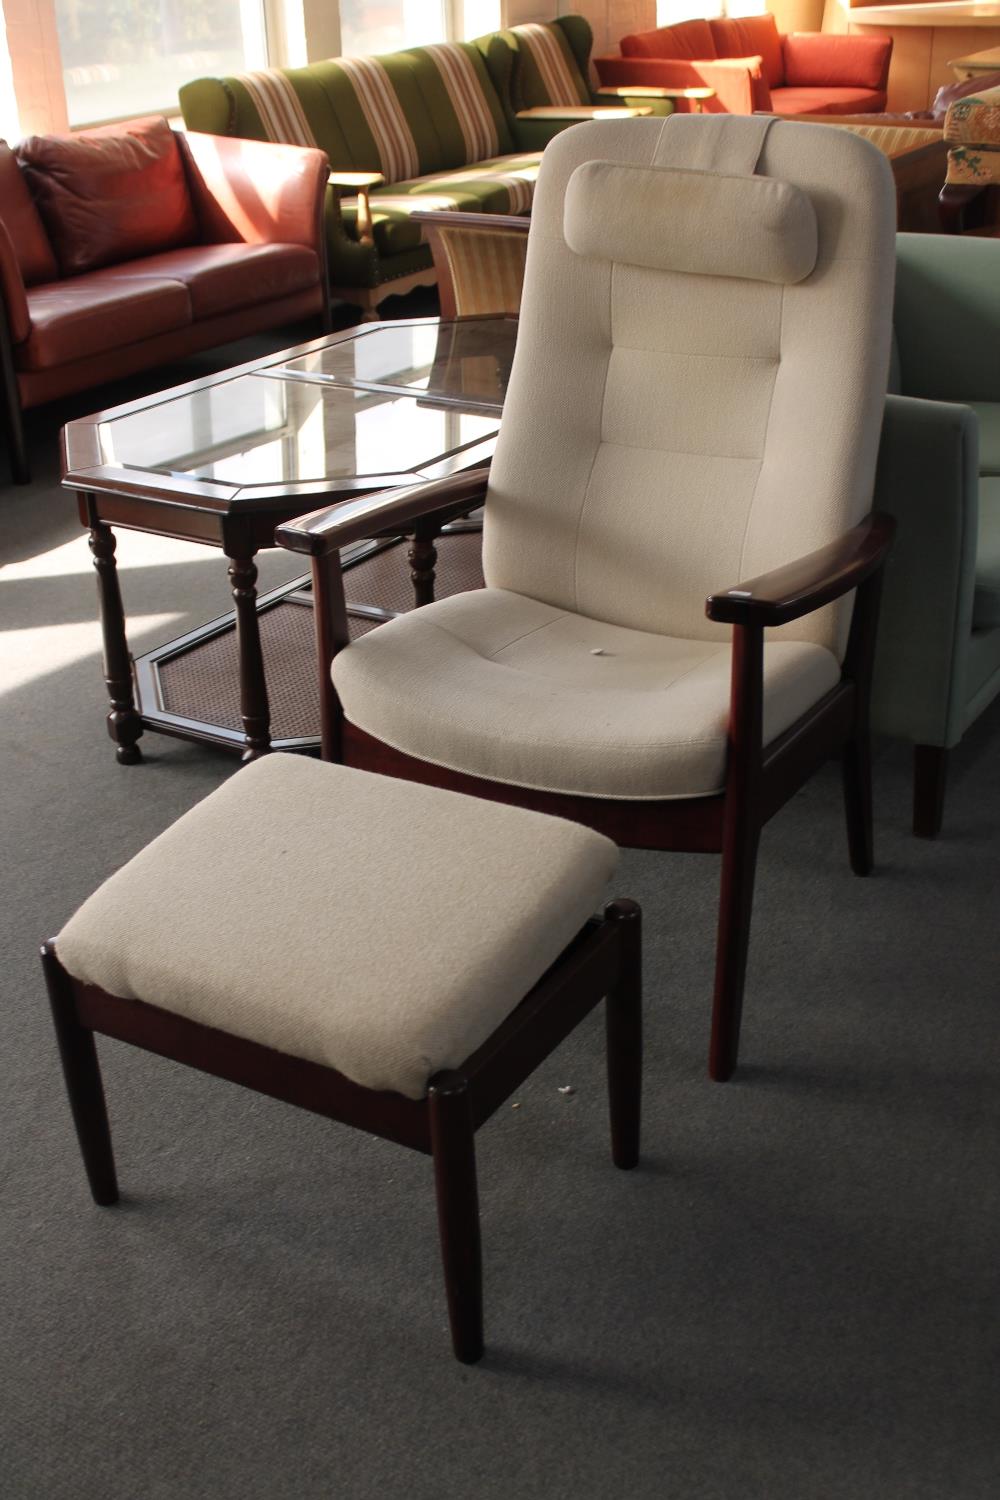 A stained beech adjustable armchair and footstool in beige fabric